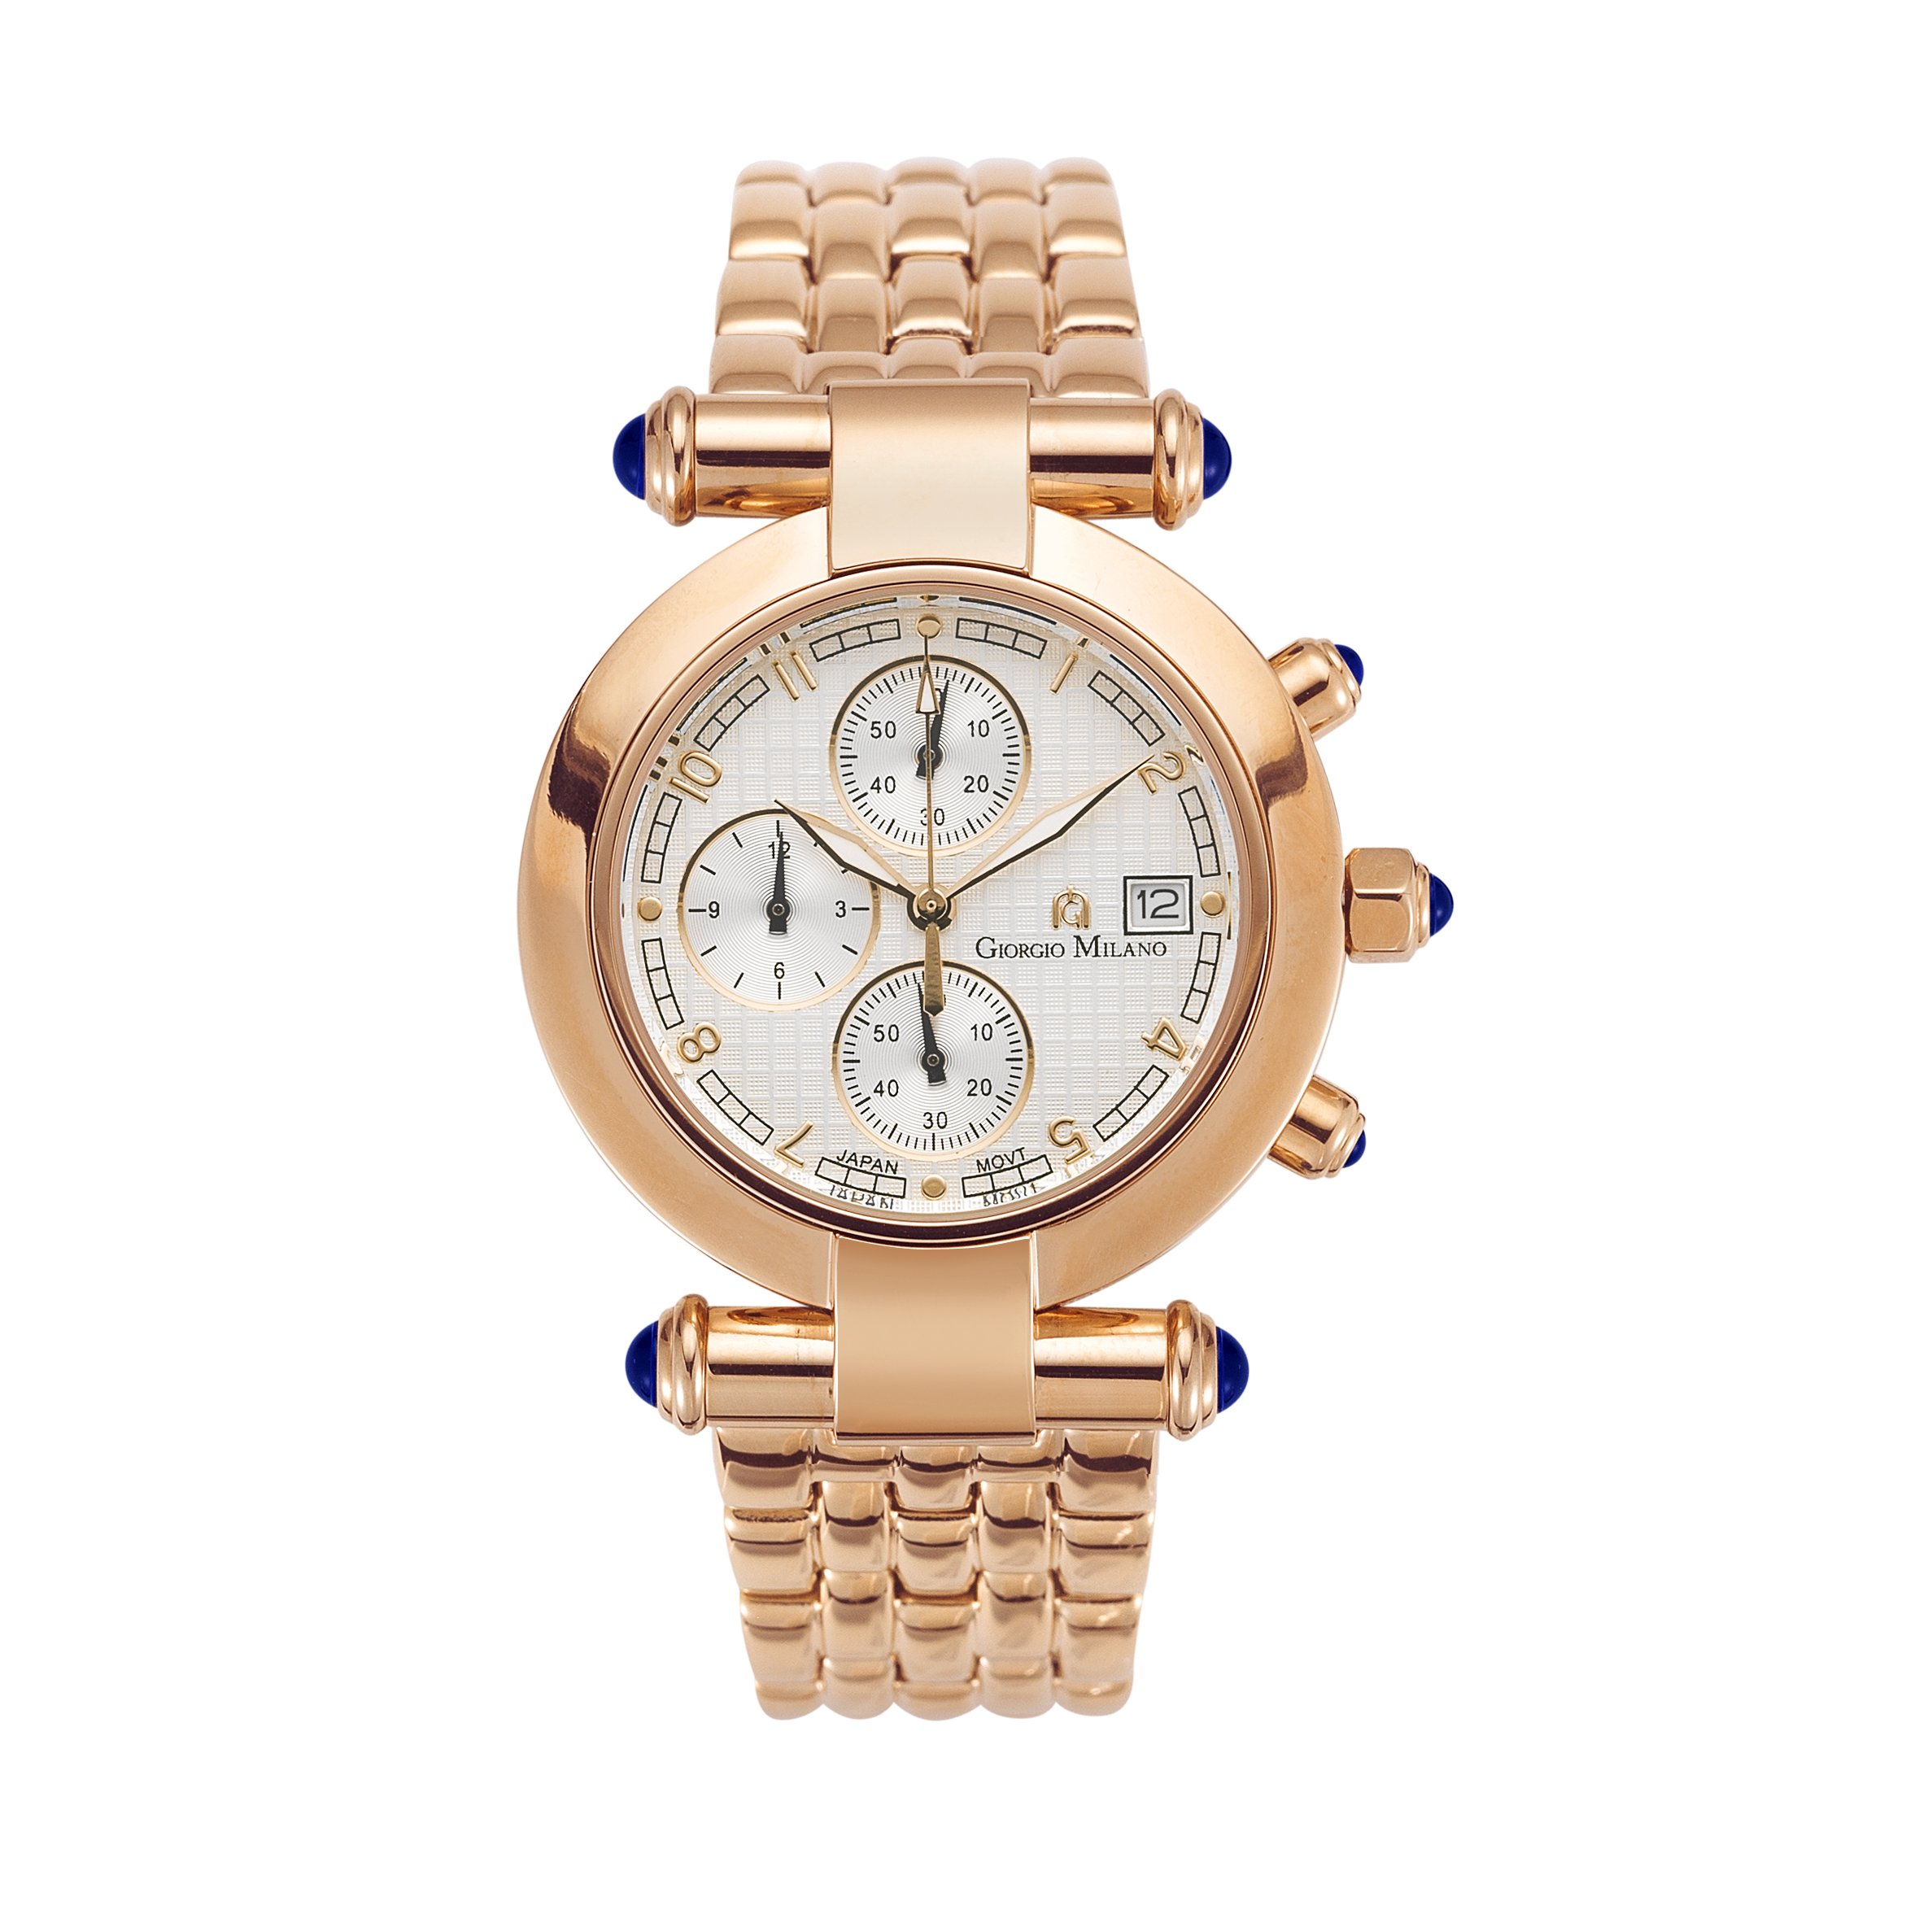 Giorgio Milano 'Lucia' Luxury Women's Wrist Watches - Chronograph Ladies Watch - with 37 MM Case - Japanese Quartz Movement - Stainless Steel Band - AM/PM - Shock and Water Resistant Watch